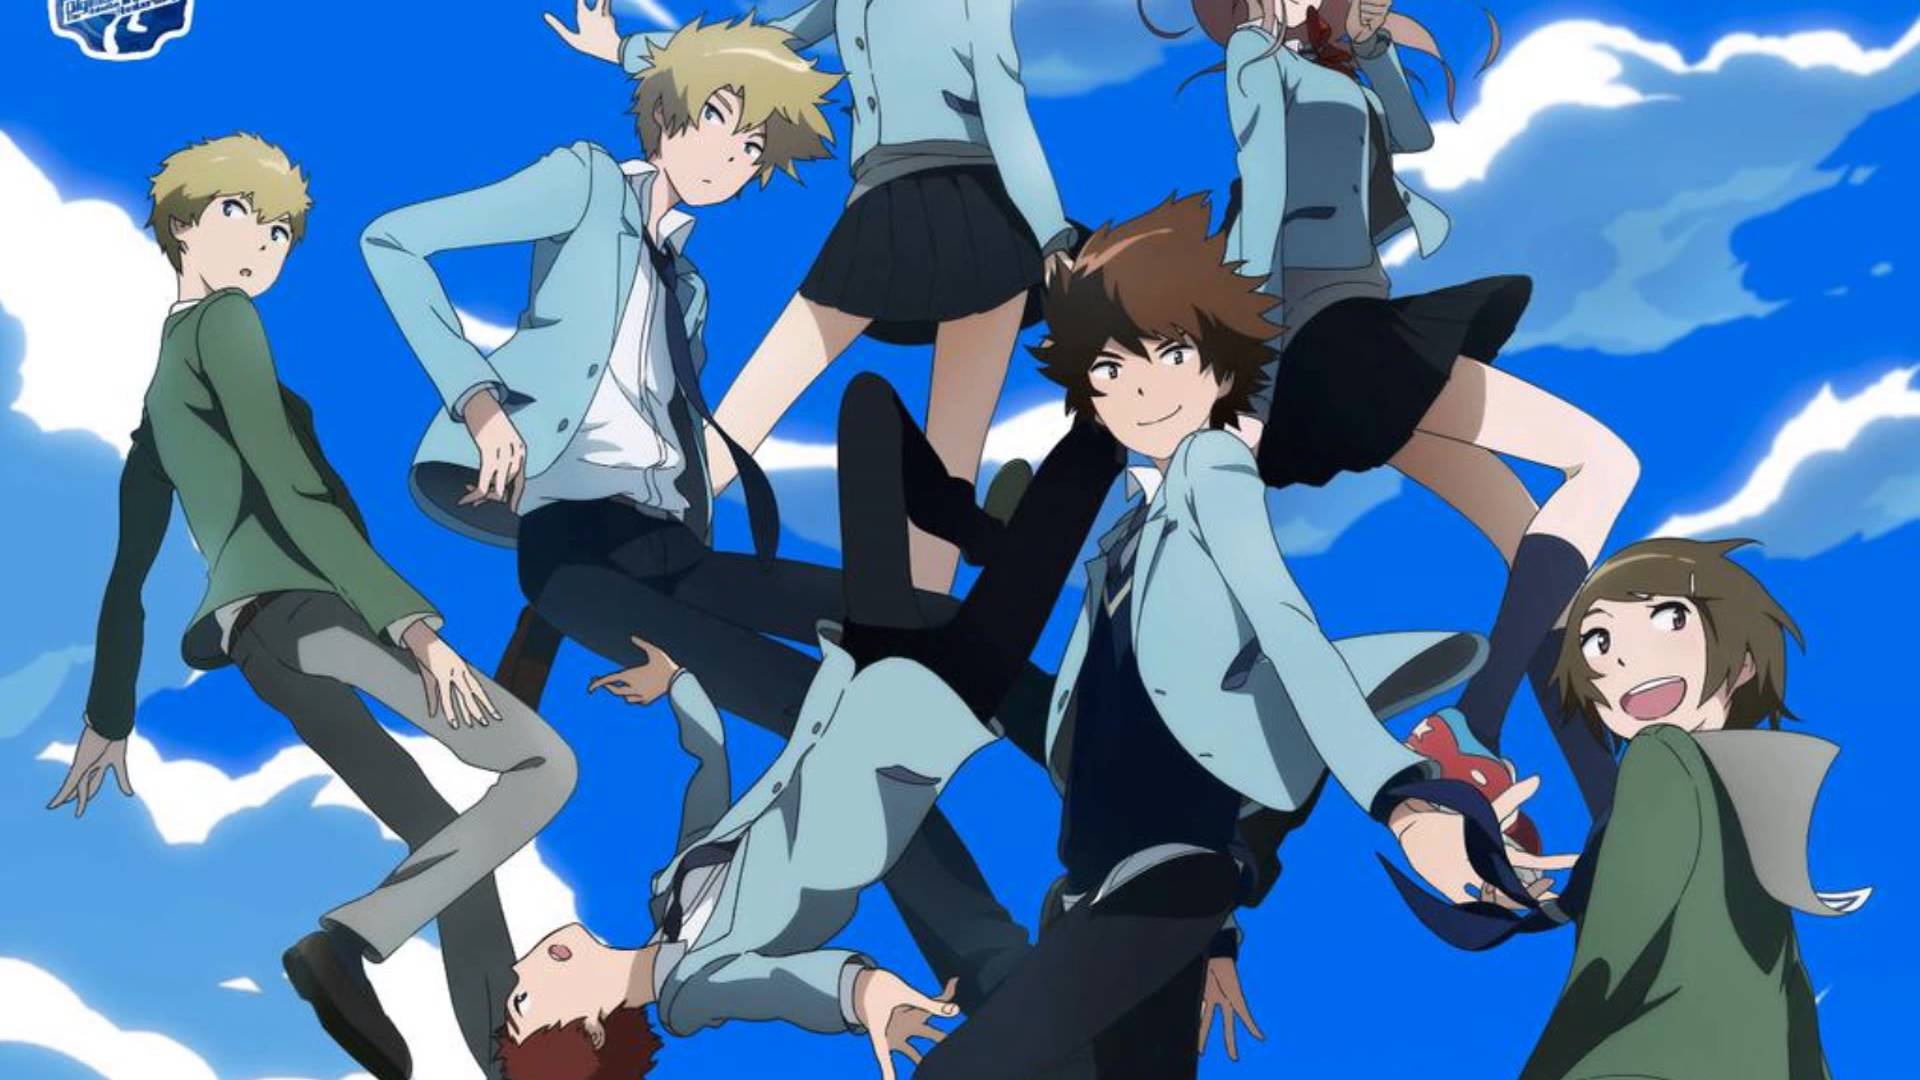 New Digimon Tri Advert Shows More Footage